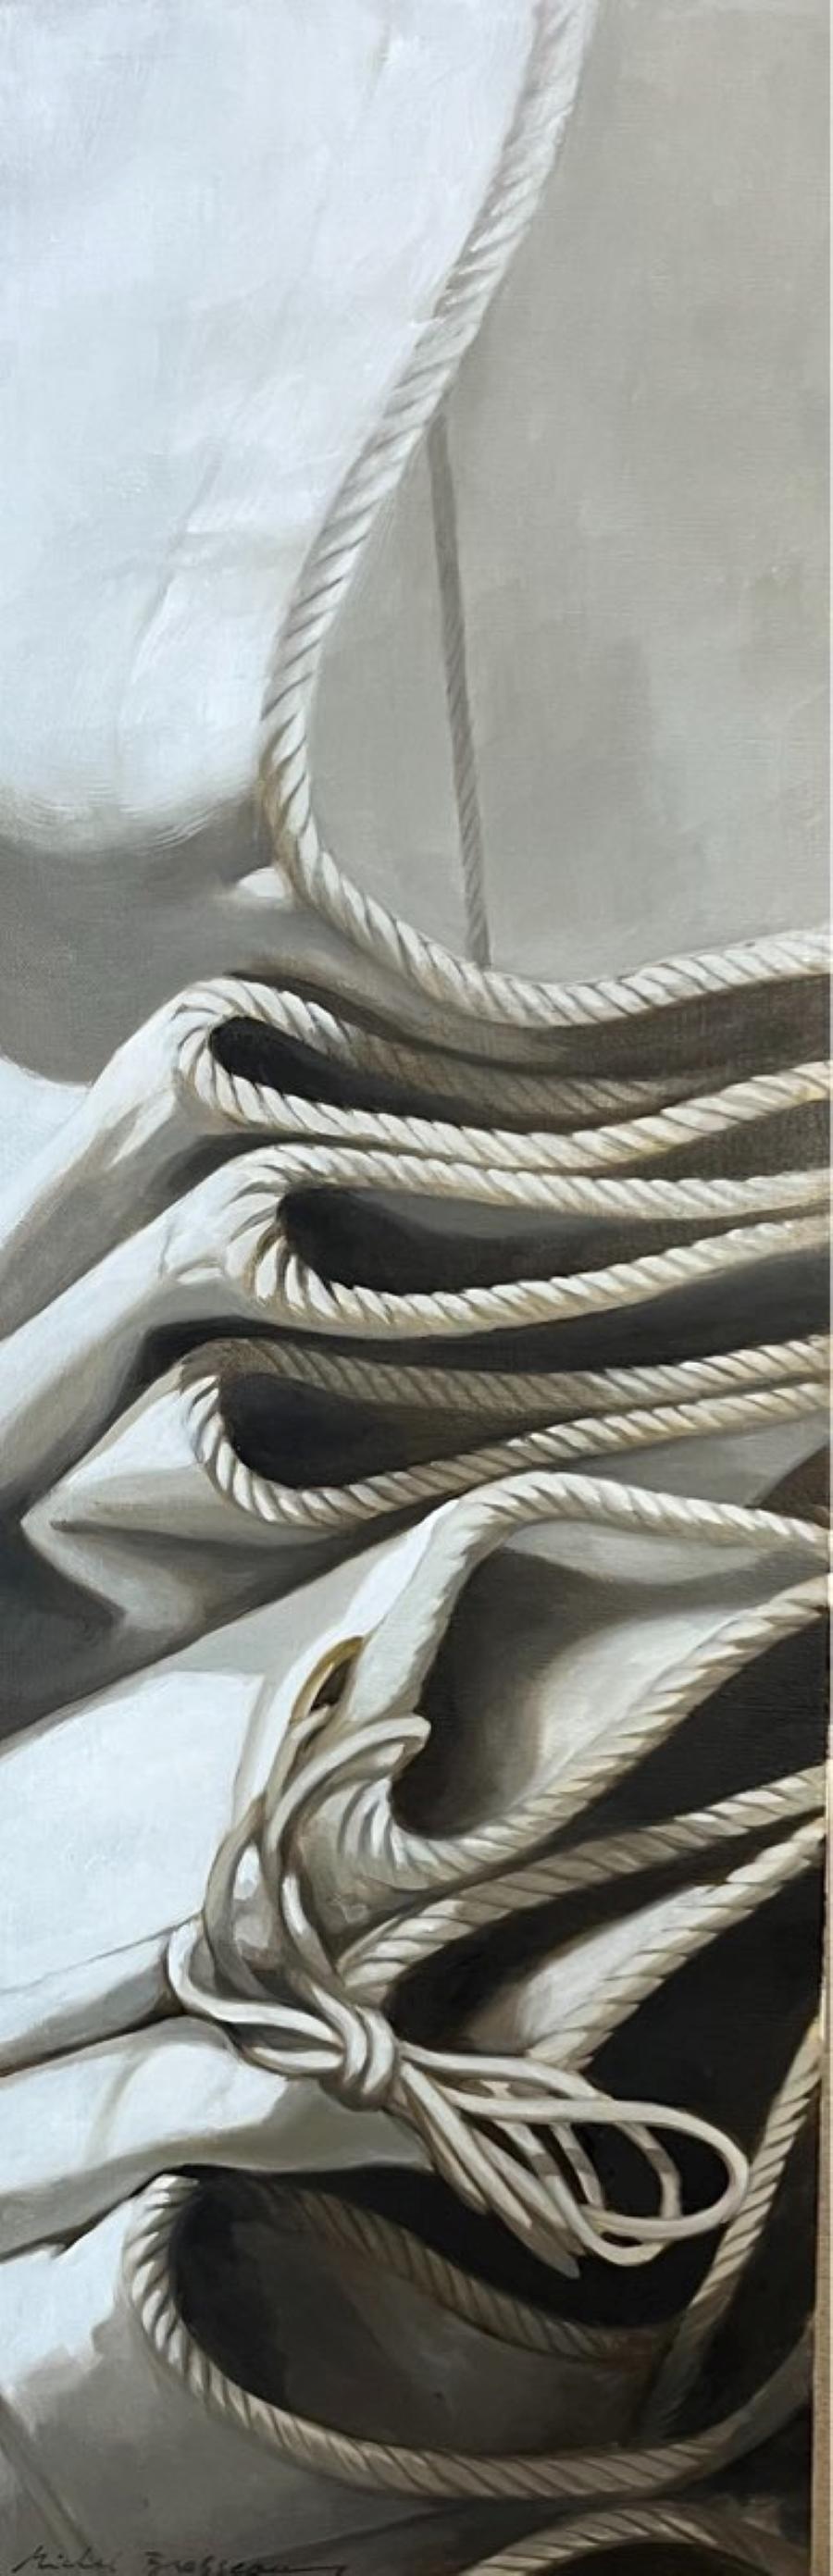 Michel Brosseau Still-Life Painting - "Unravel" a realistic and close up view of the ship's sail folded and resting